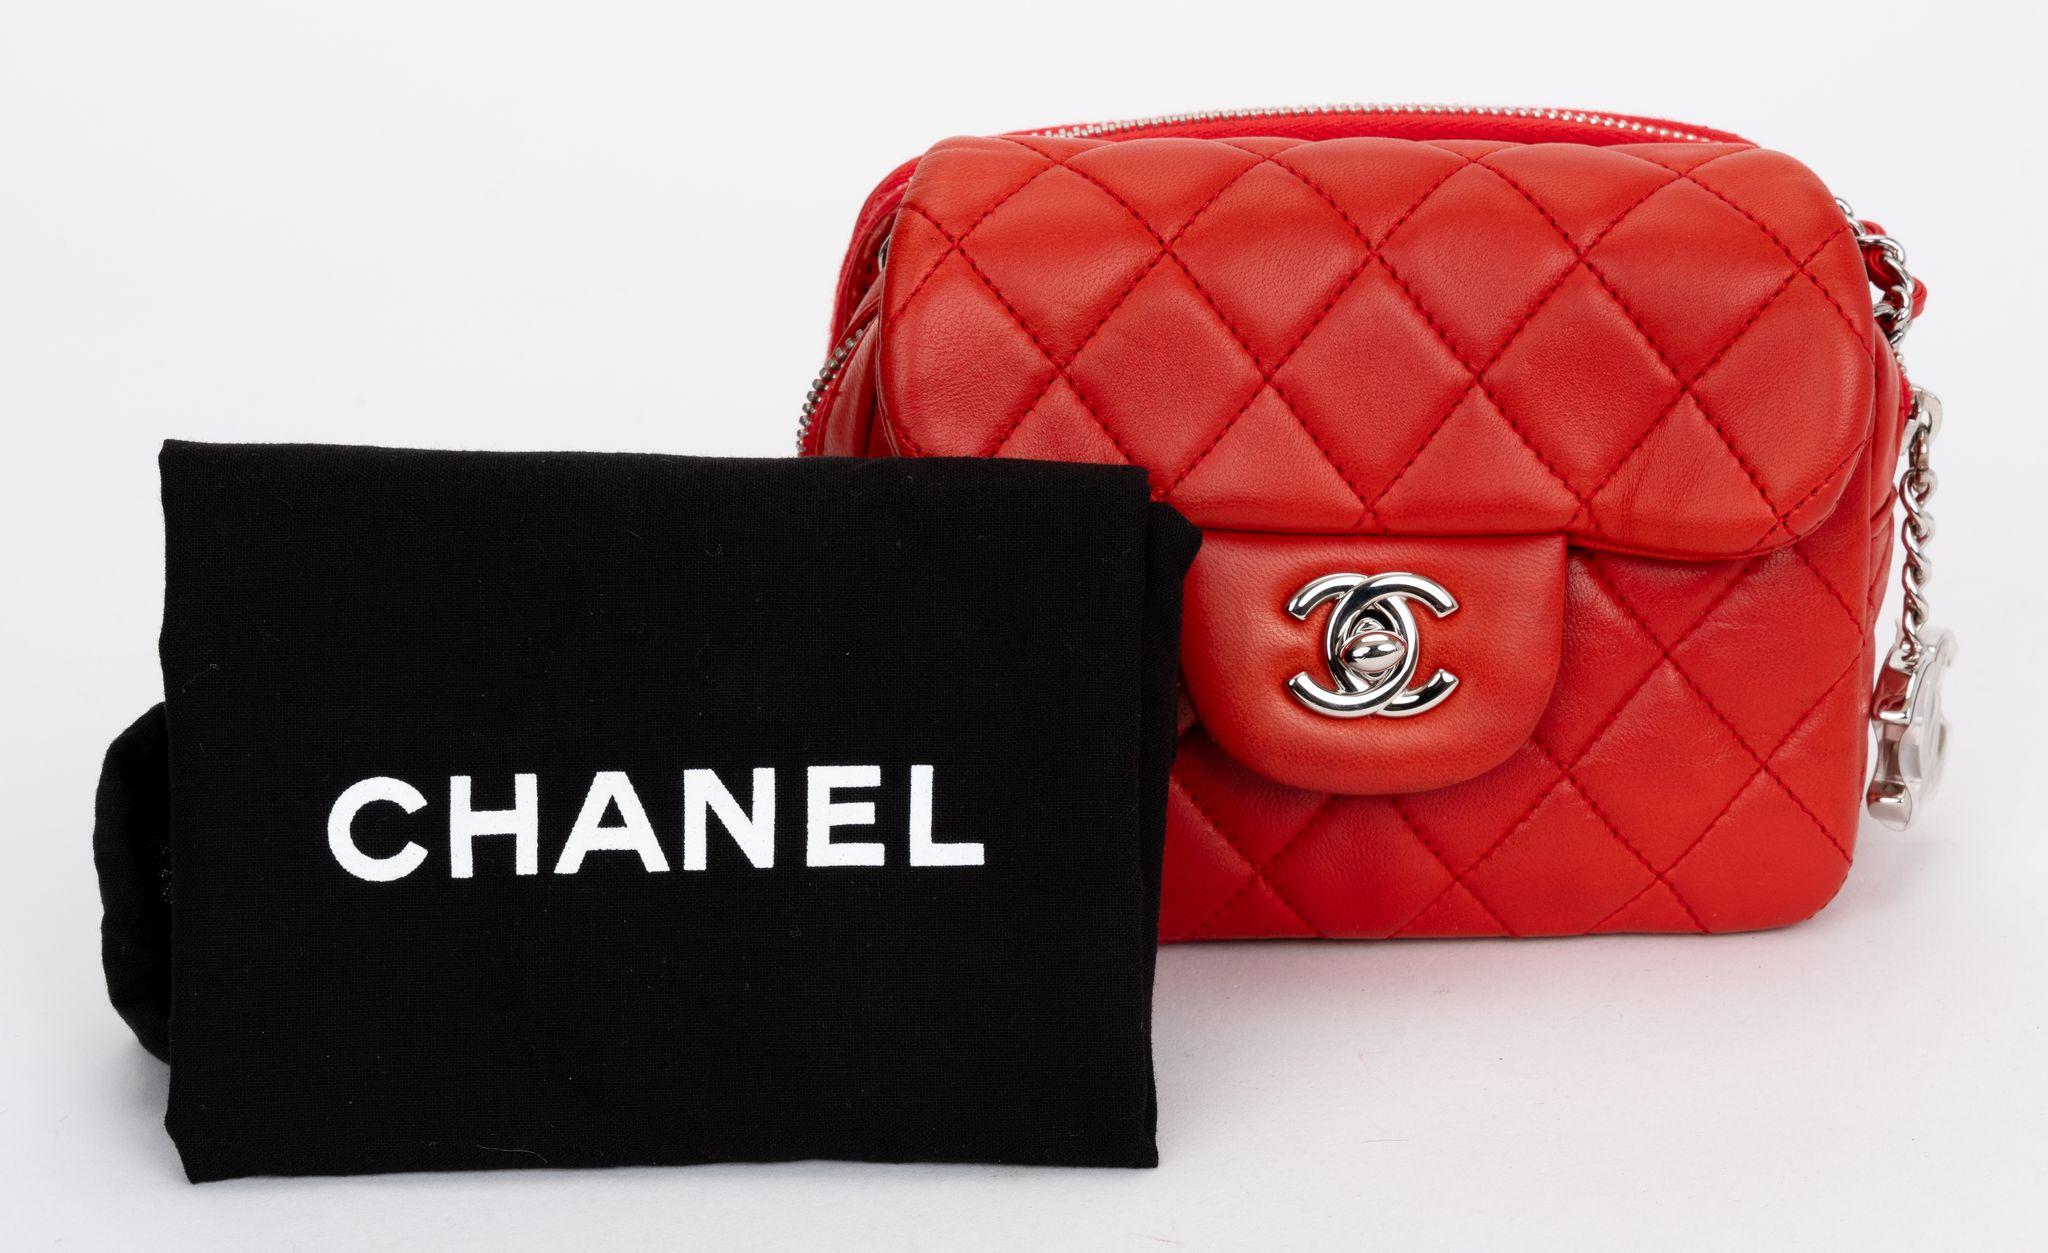 Chanel Red Leather Crossbody Flap Bag For Sale 4